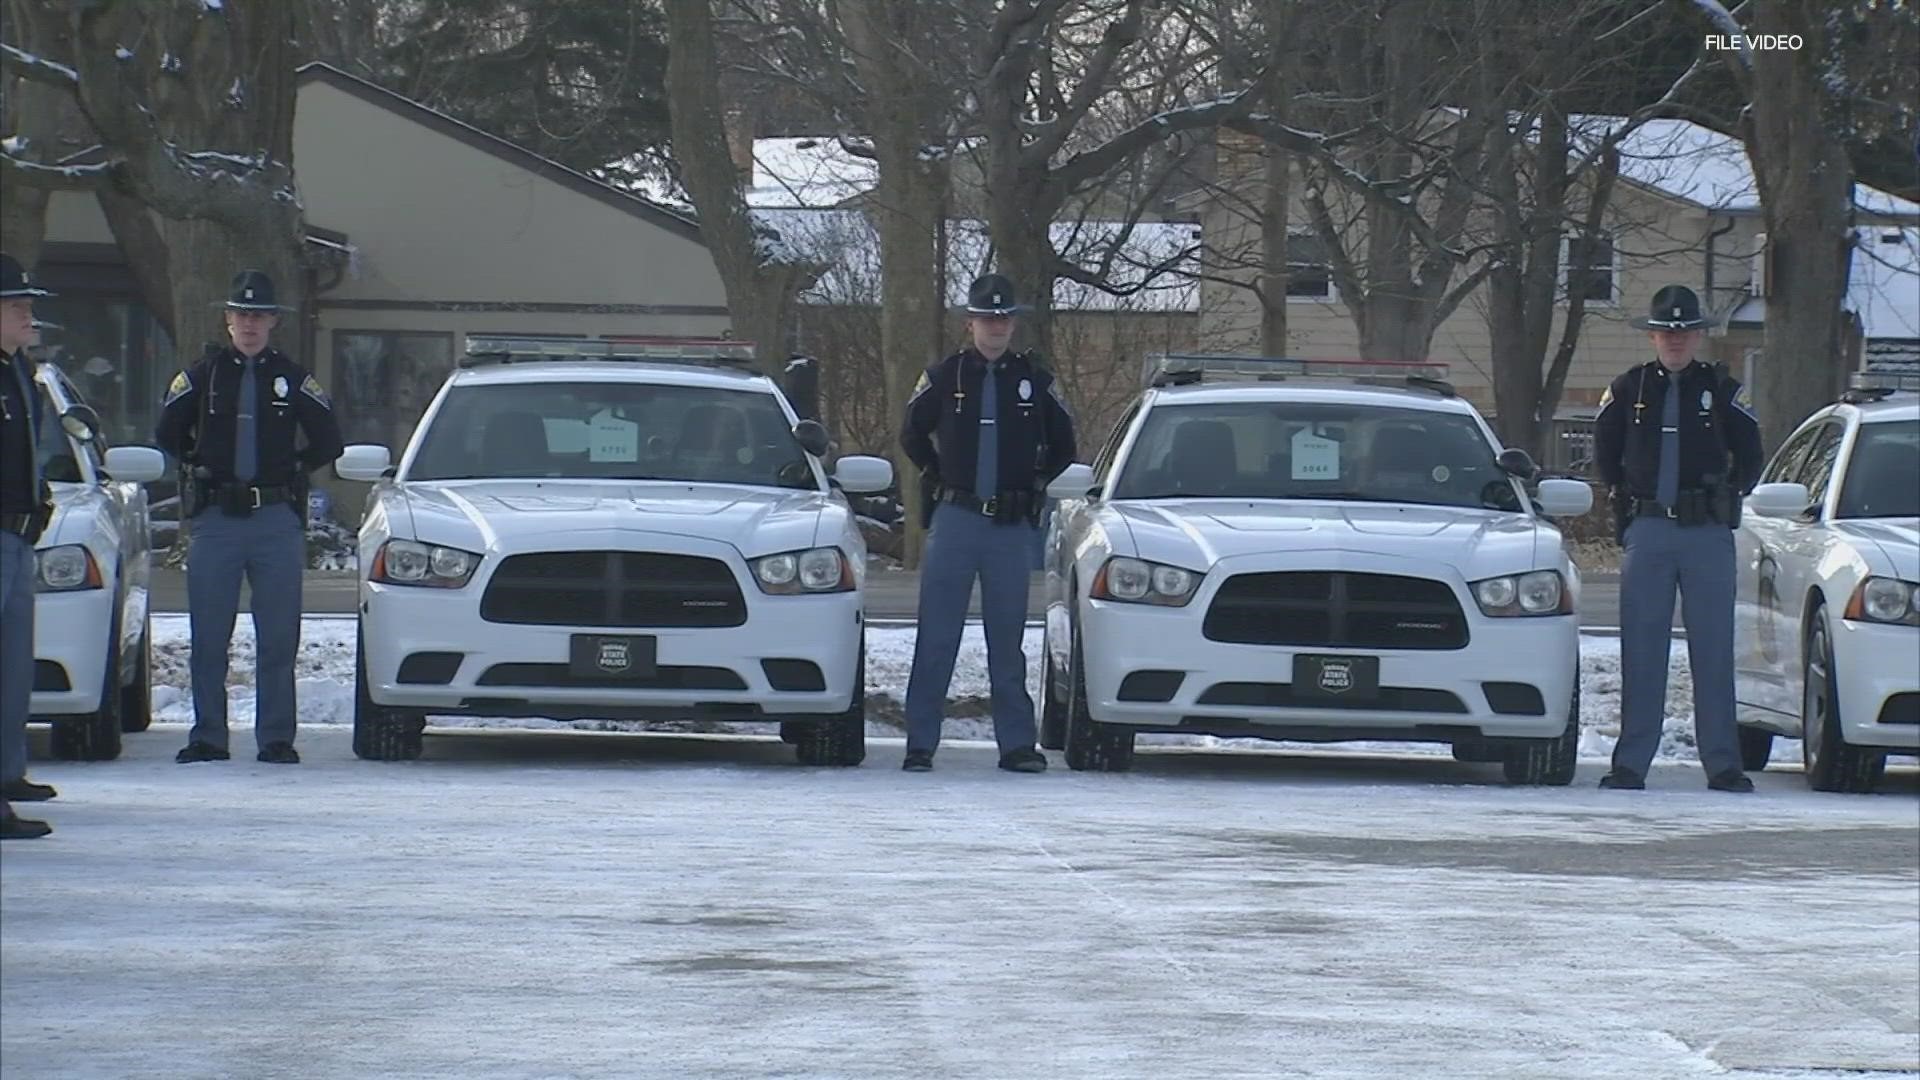 Indiana state police are pushing to get more troopers on the force.